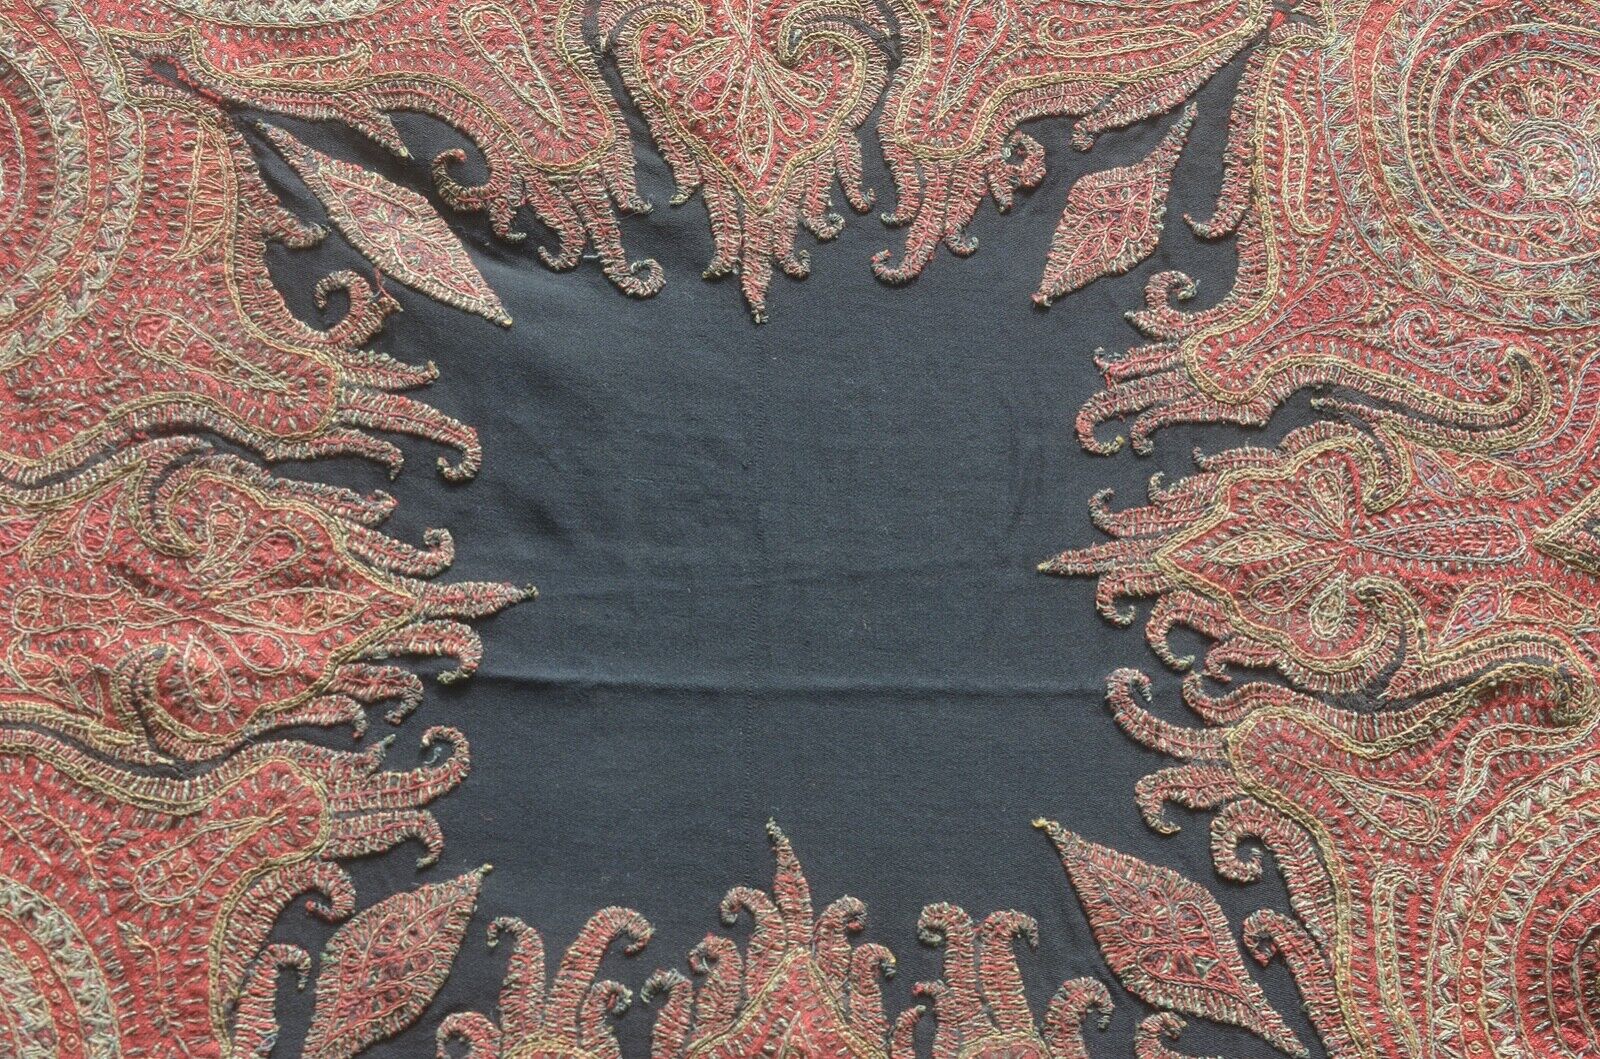 Authentic 19th C. Kashmiri Paisley Shawl Hand Embroidered VV580